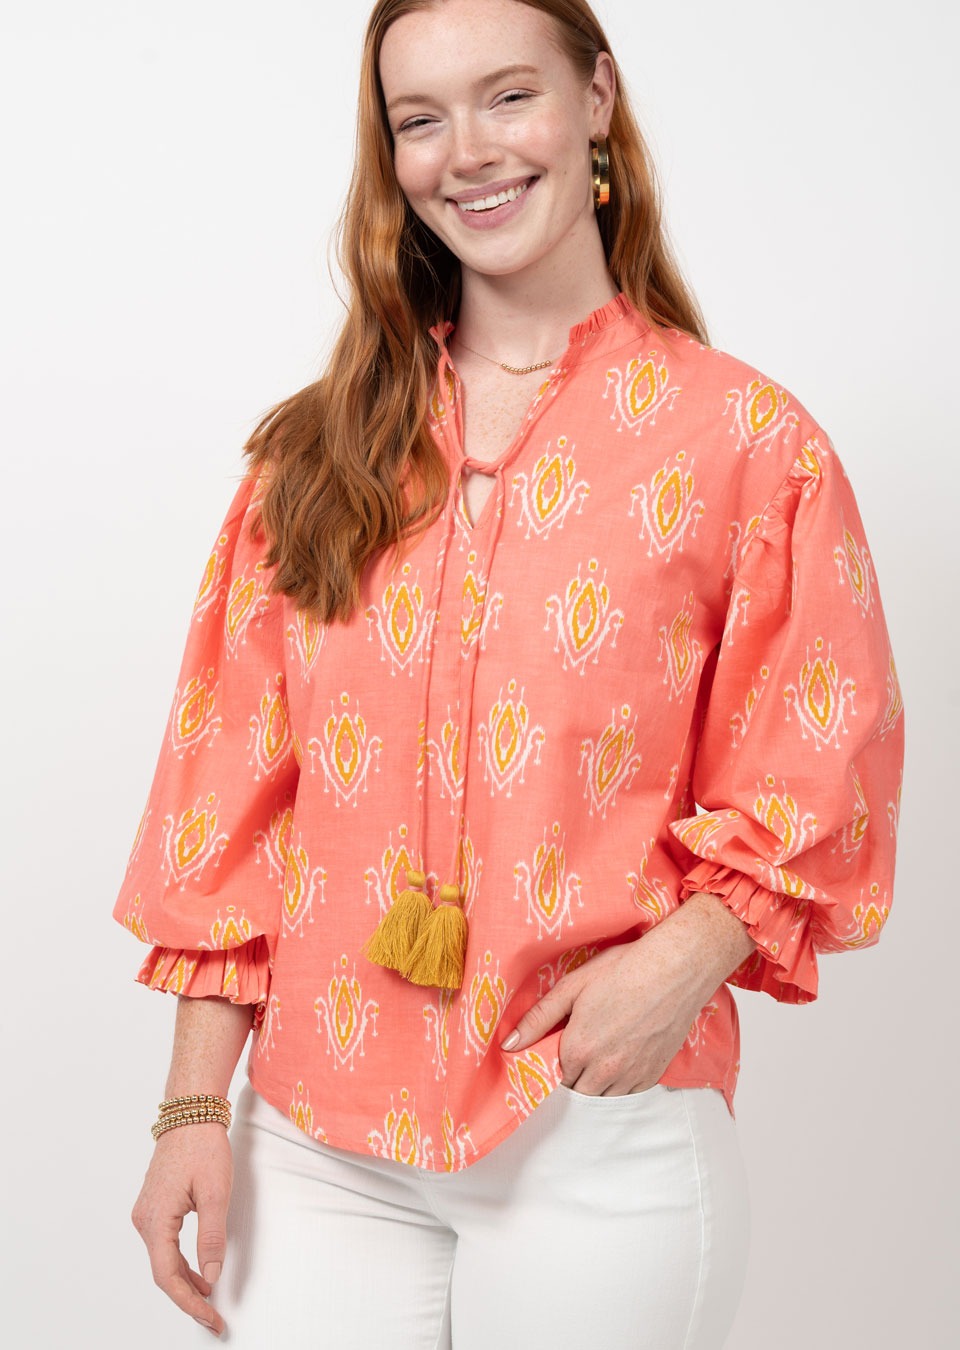 ivy jane ikat blouson sleeve top in coral-front